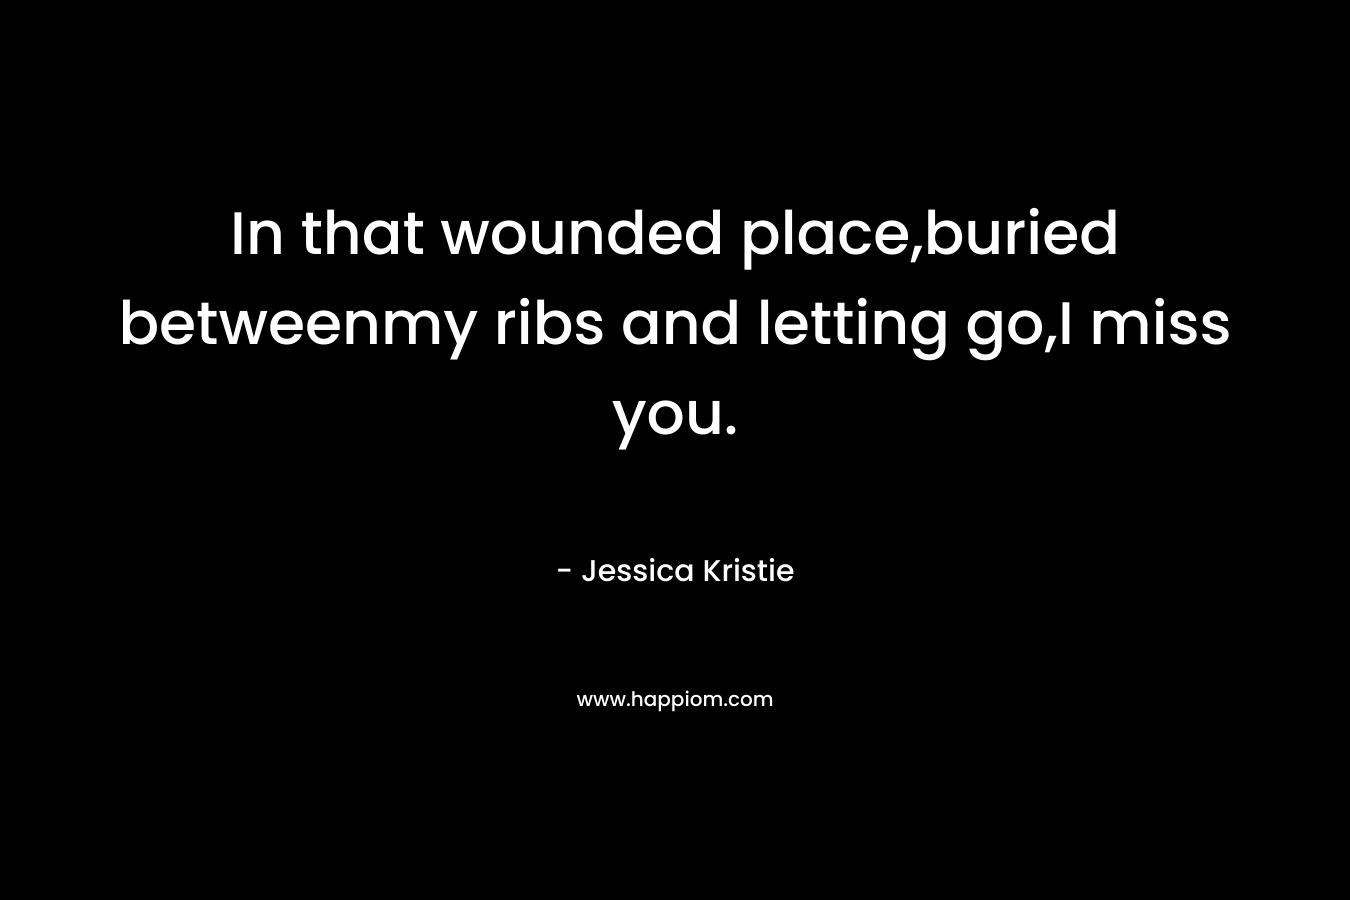 In that wounded place,buried betweenmy ribs and letting go,I miss you.